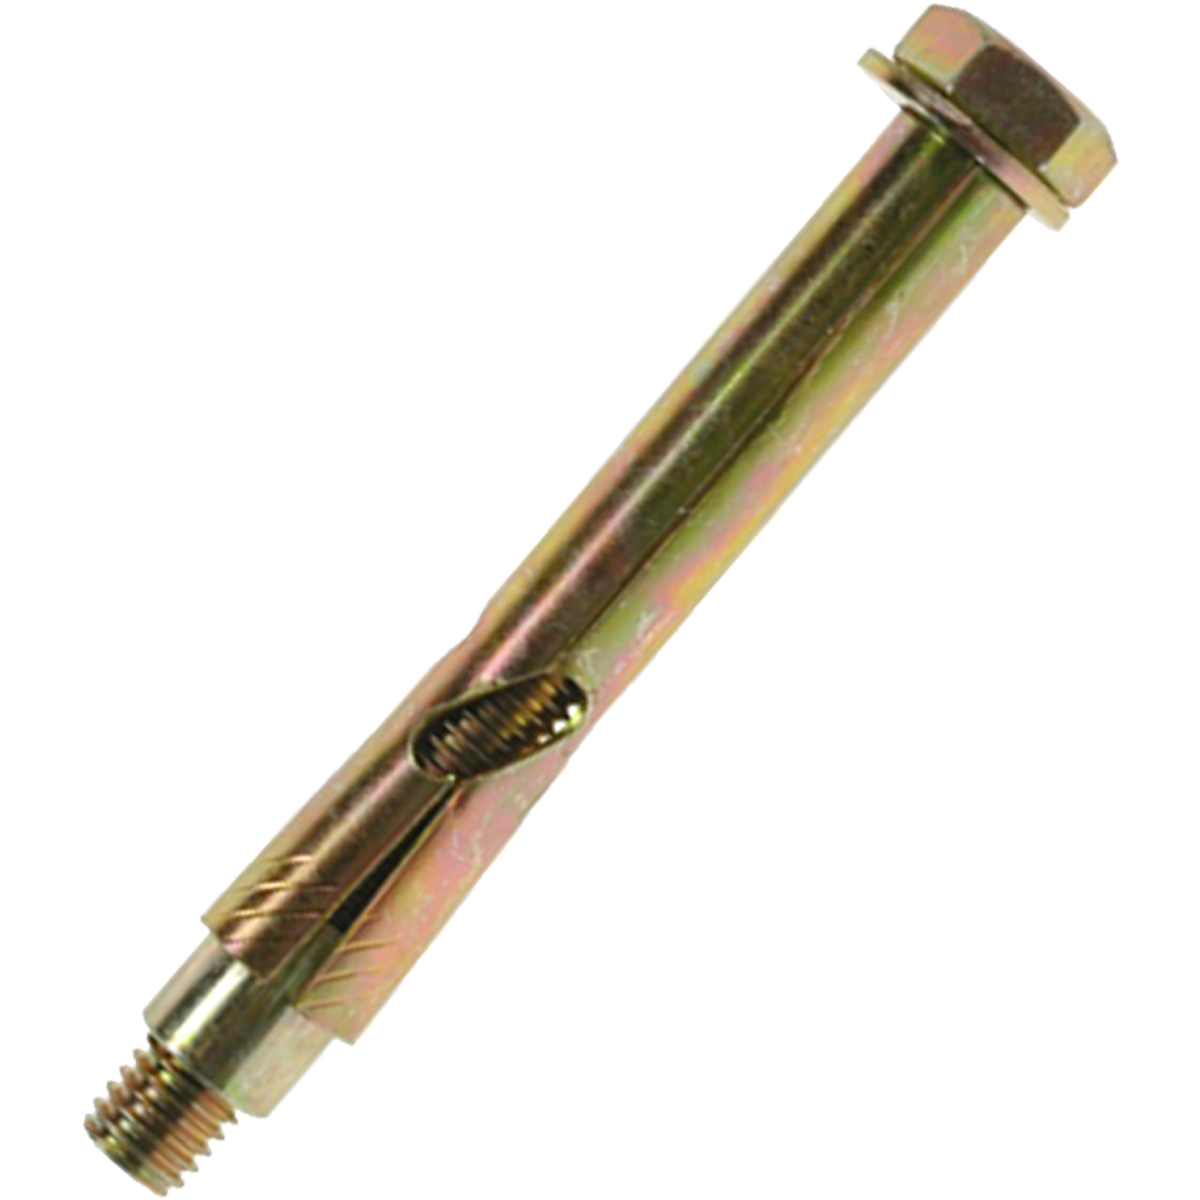 Sleeve anchor bolts with a hex head at competitive prices.